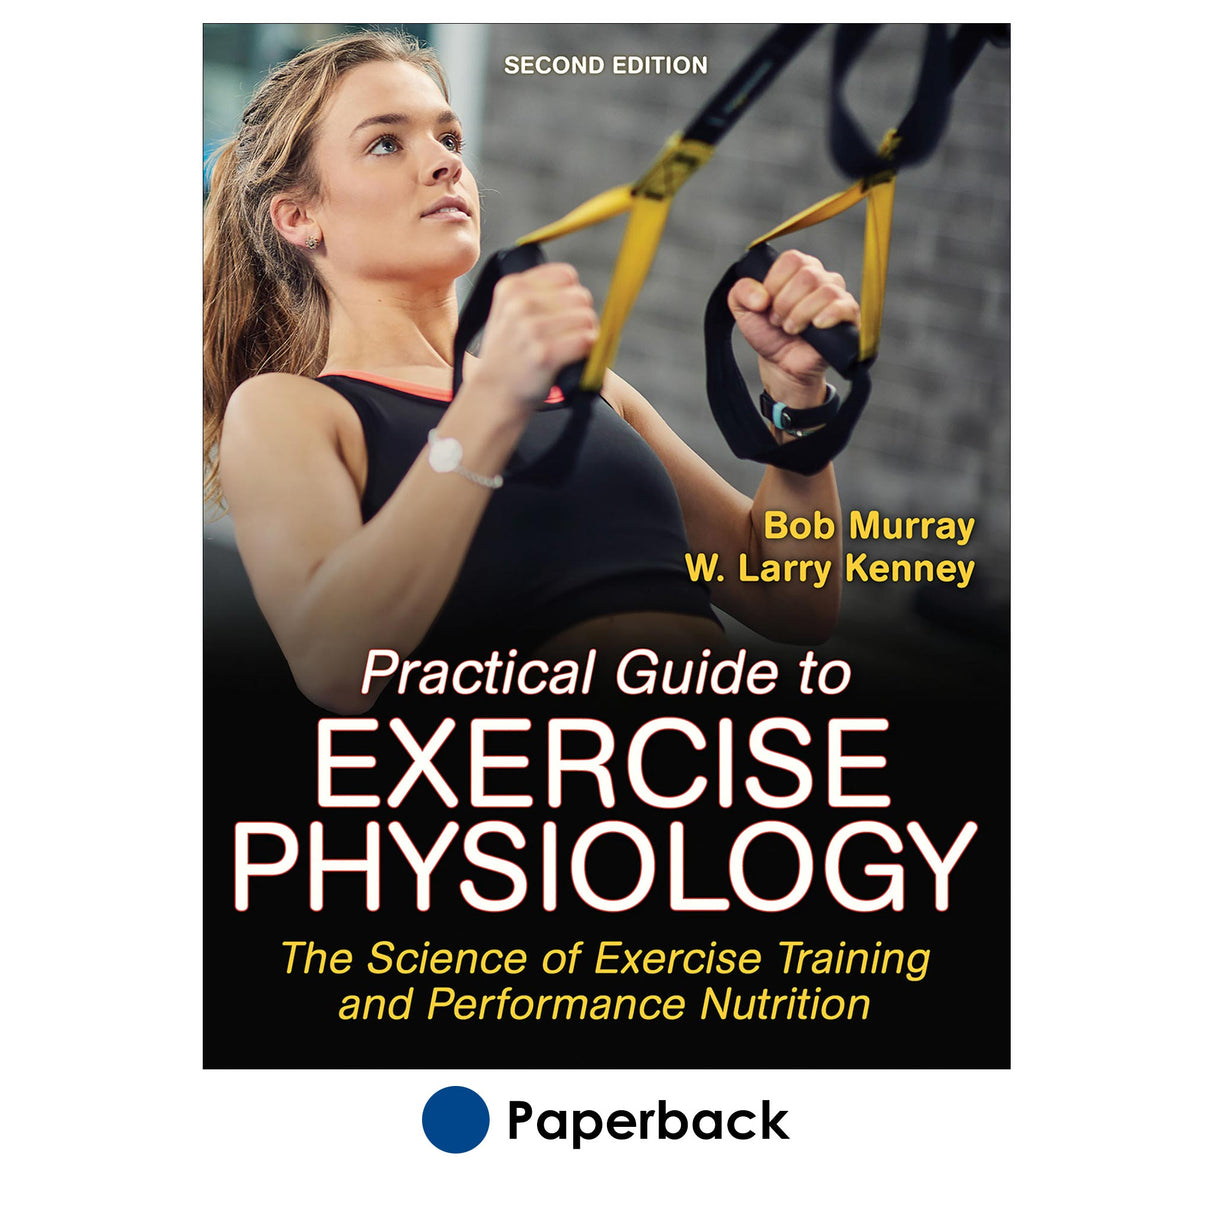 Practical Guide to Exercise Physiology-2nd Edition